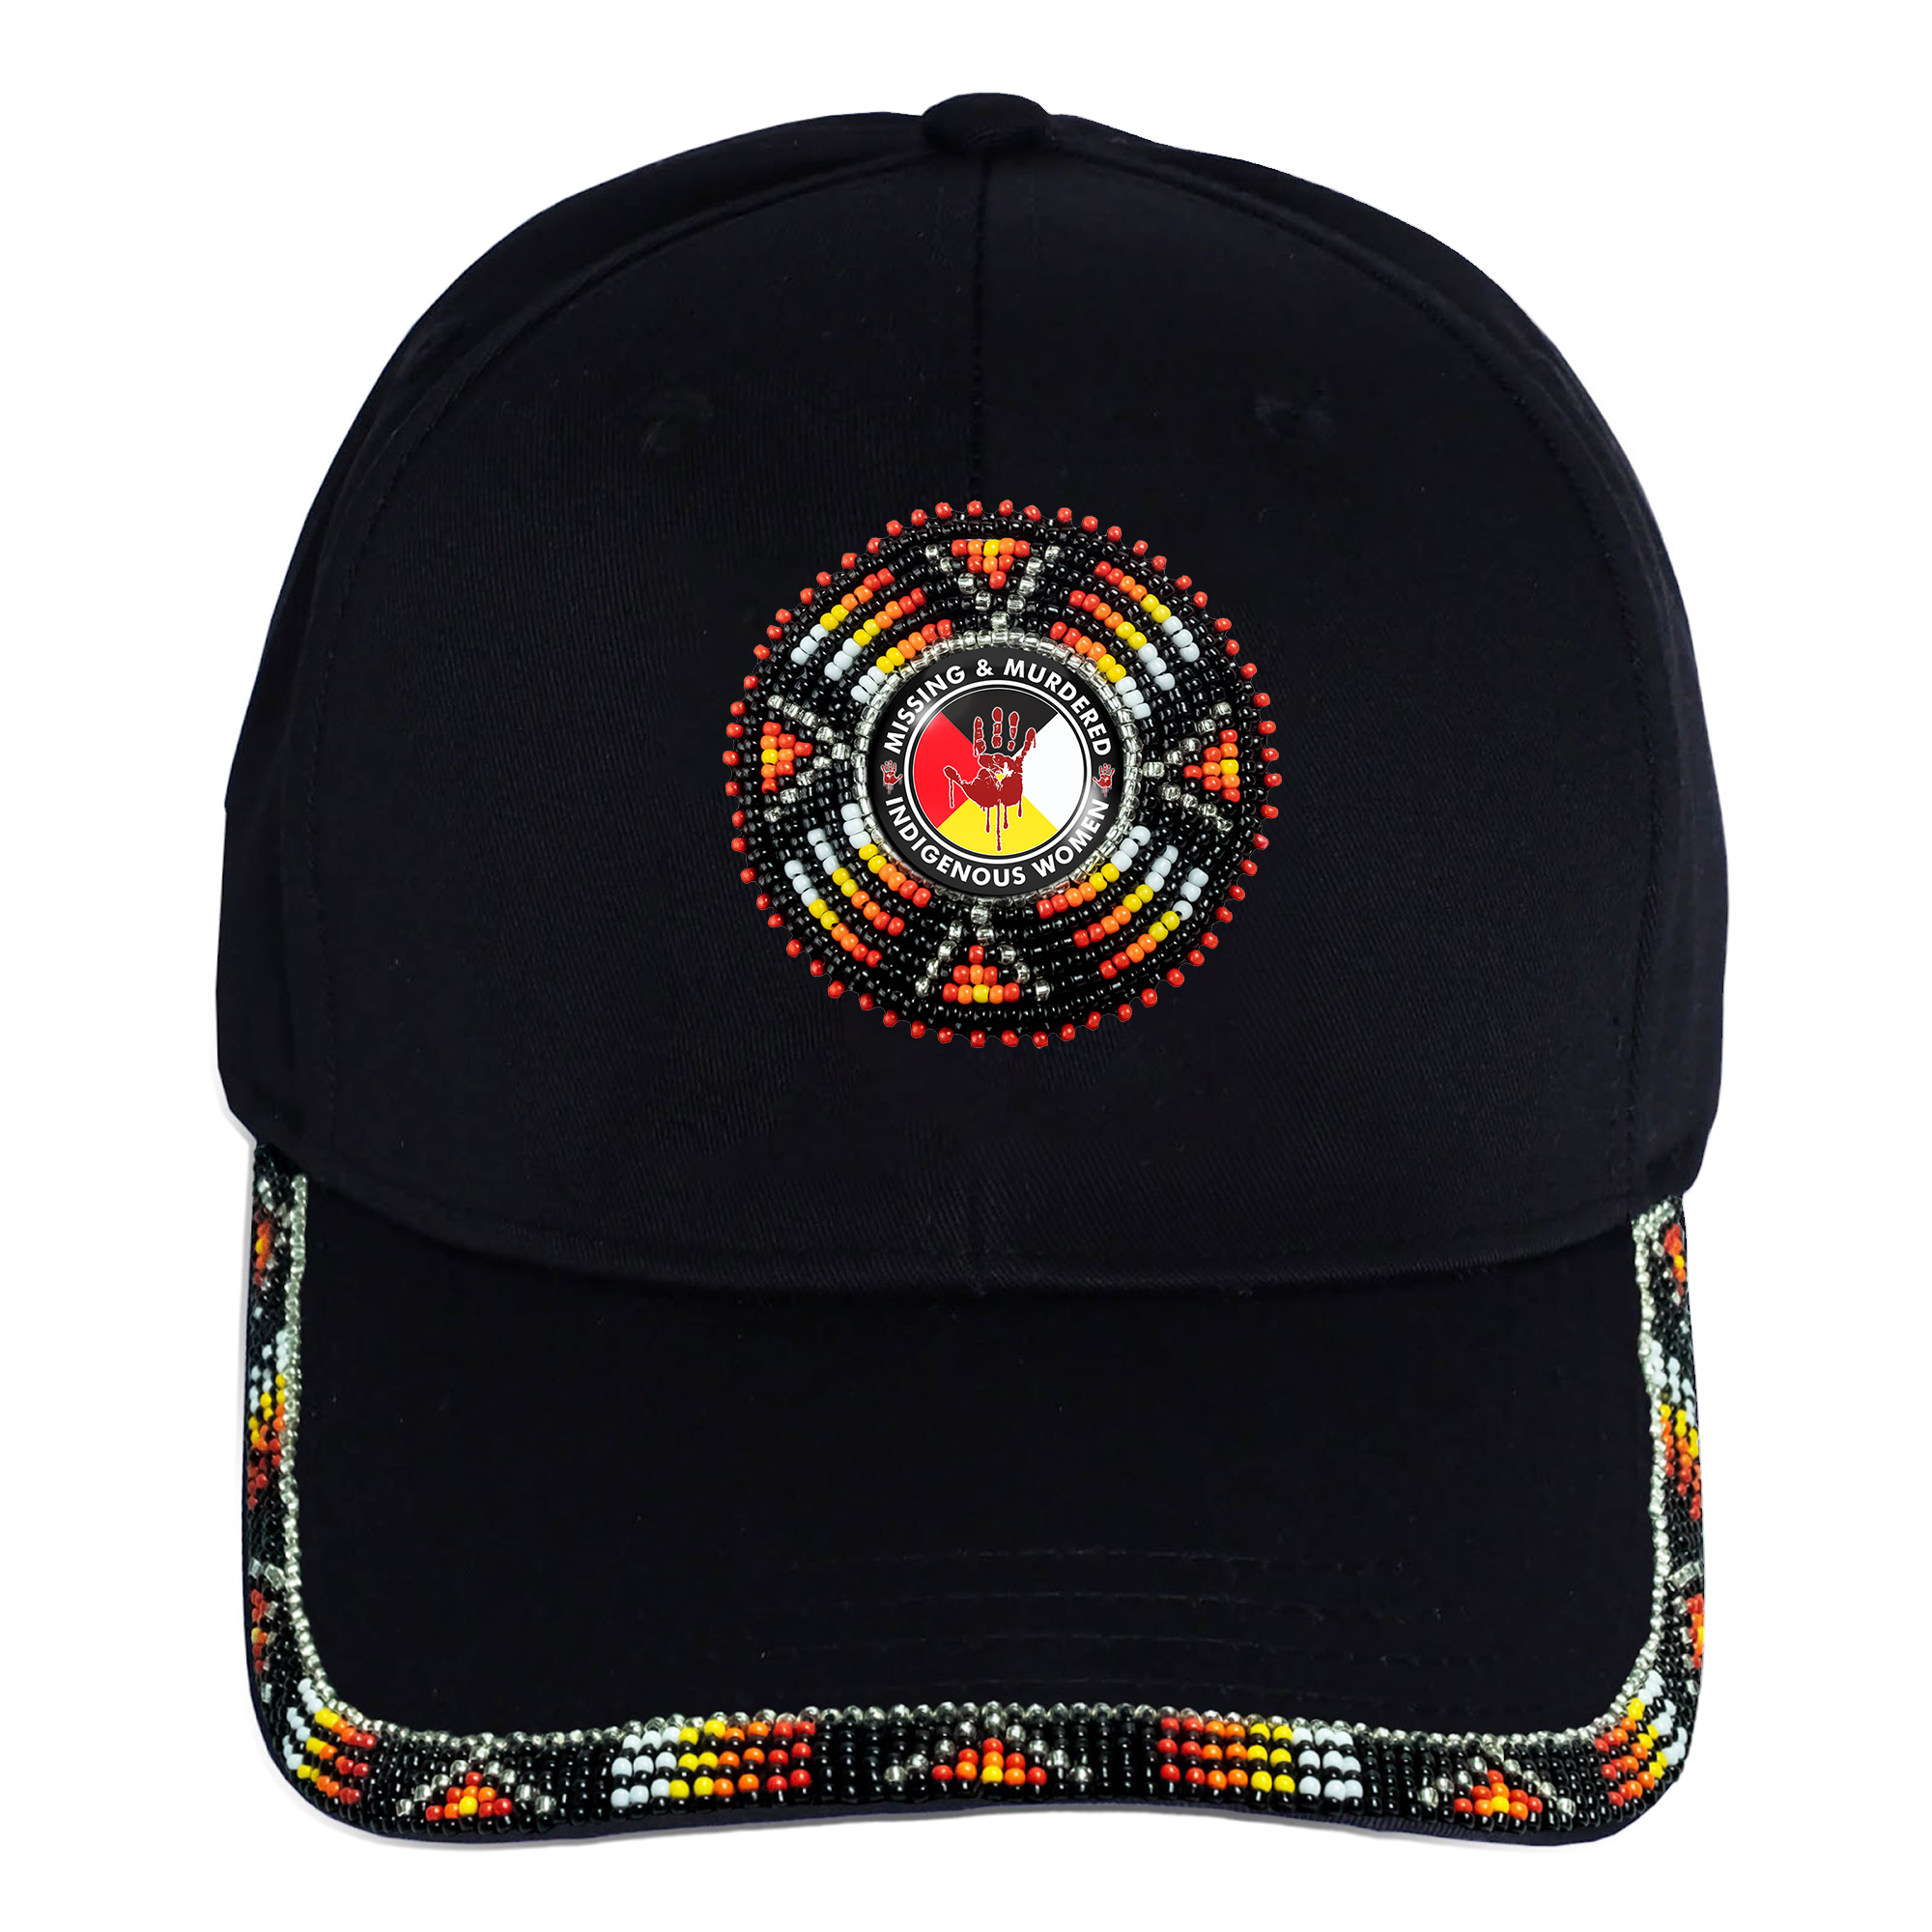 SALE 50% OFF - MMIW Cotton Unisex Baseball Cap With Beaded Patch Brim Native American Style